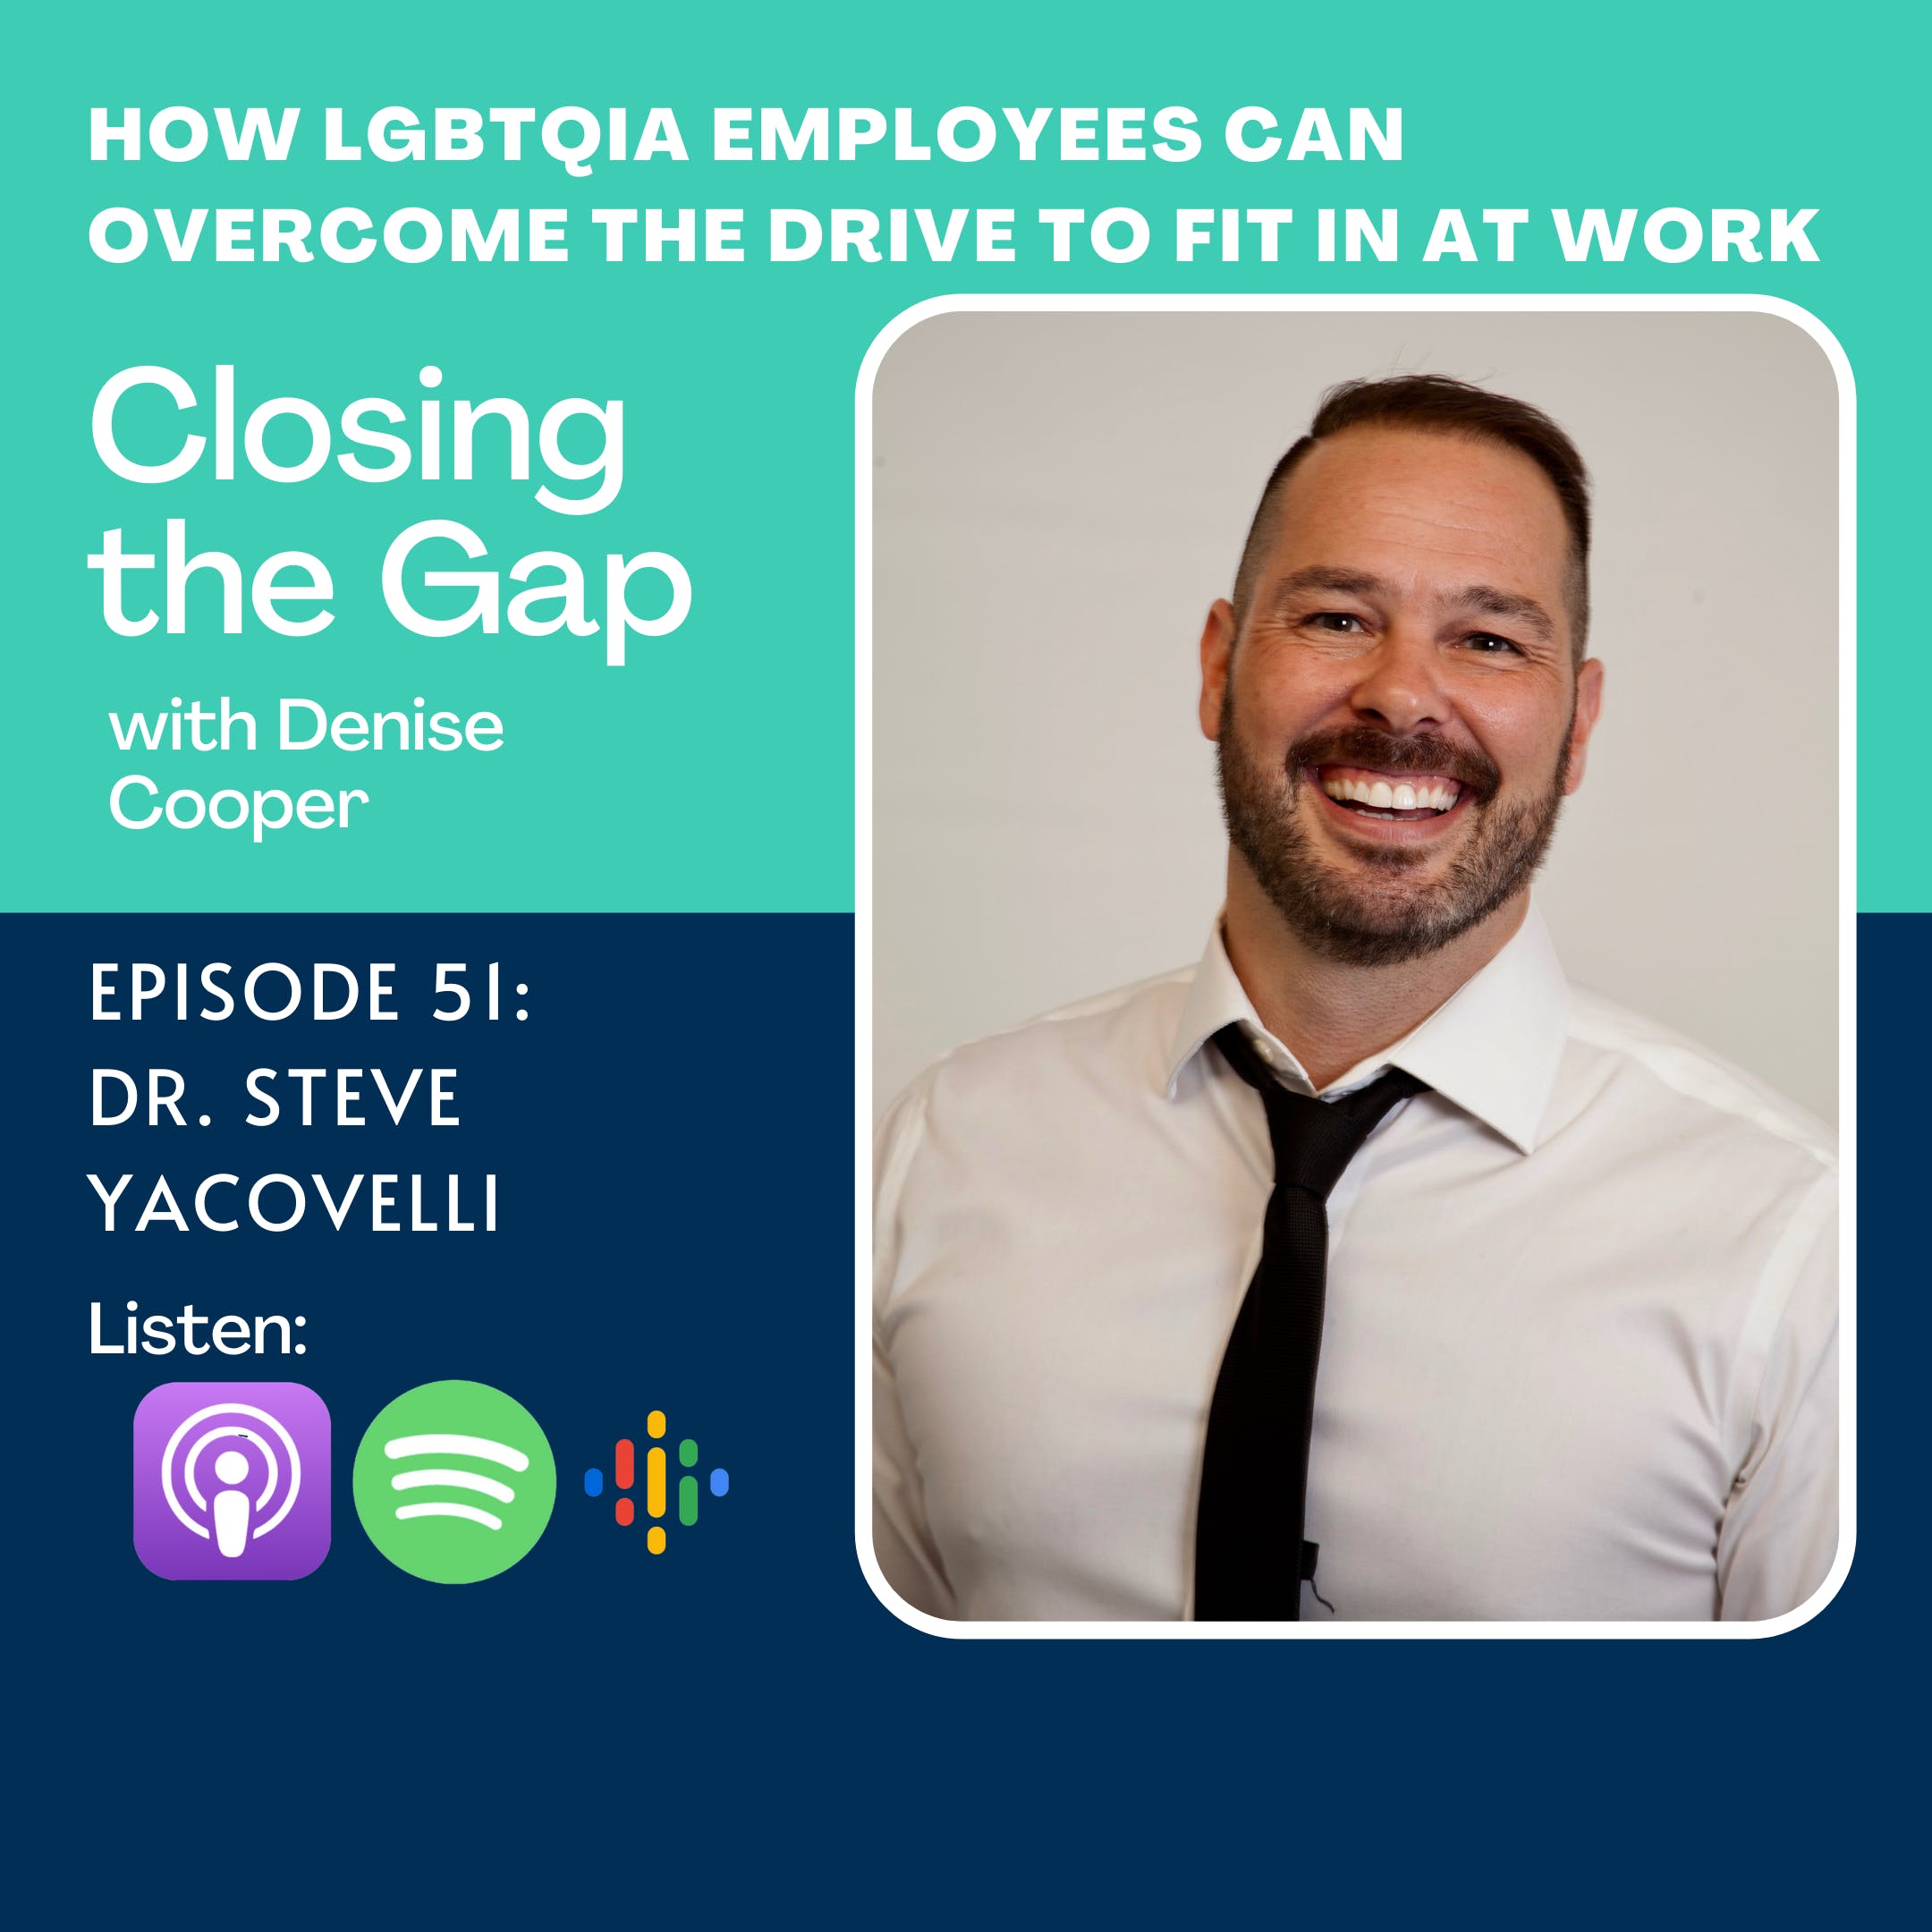 Episode 51: The Question of Being Authentic at Work with Dr. Steve Yacovelli The Gay Leadership Dude